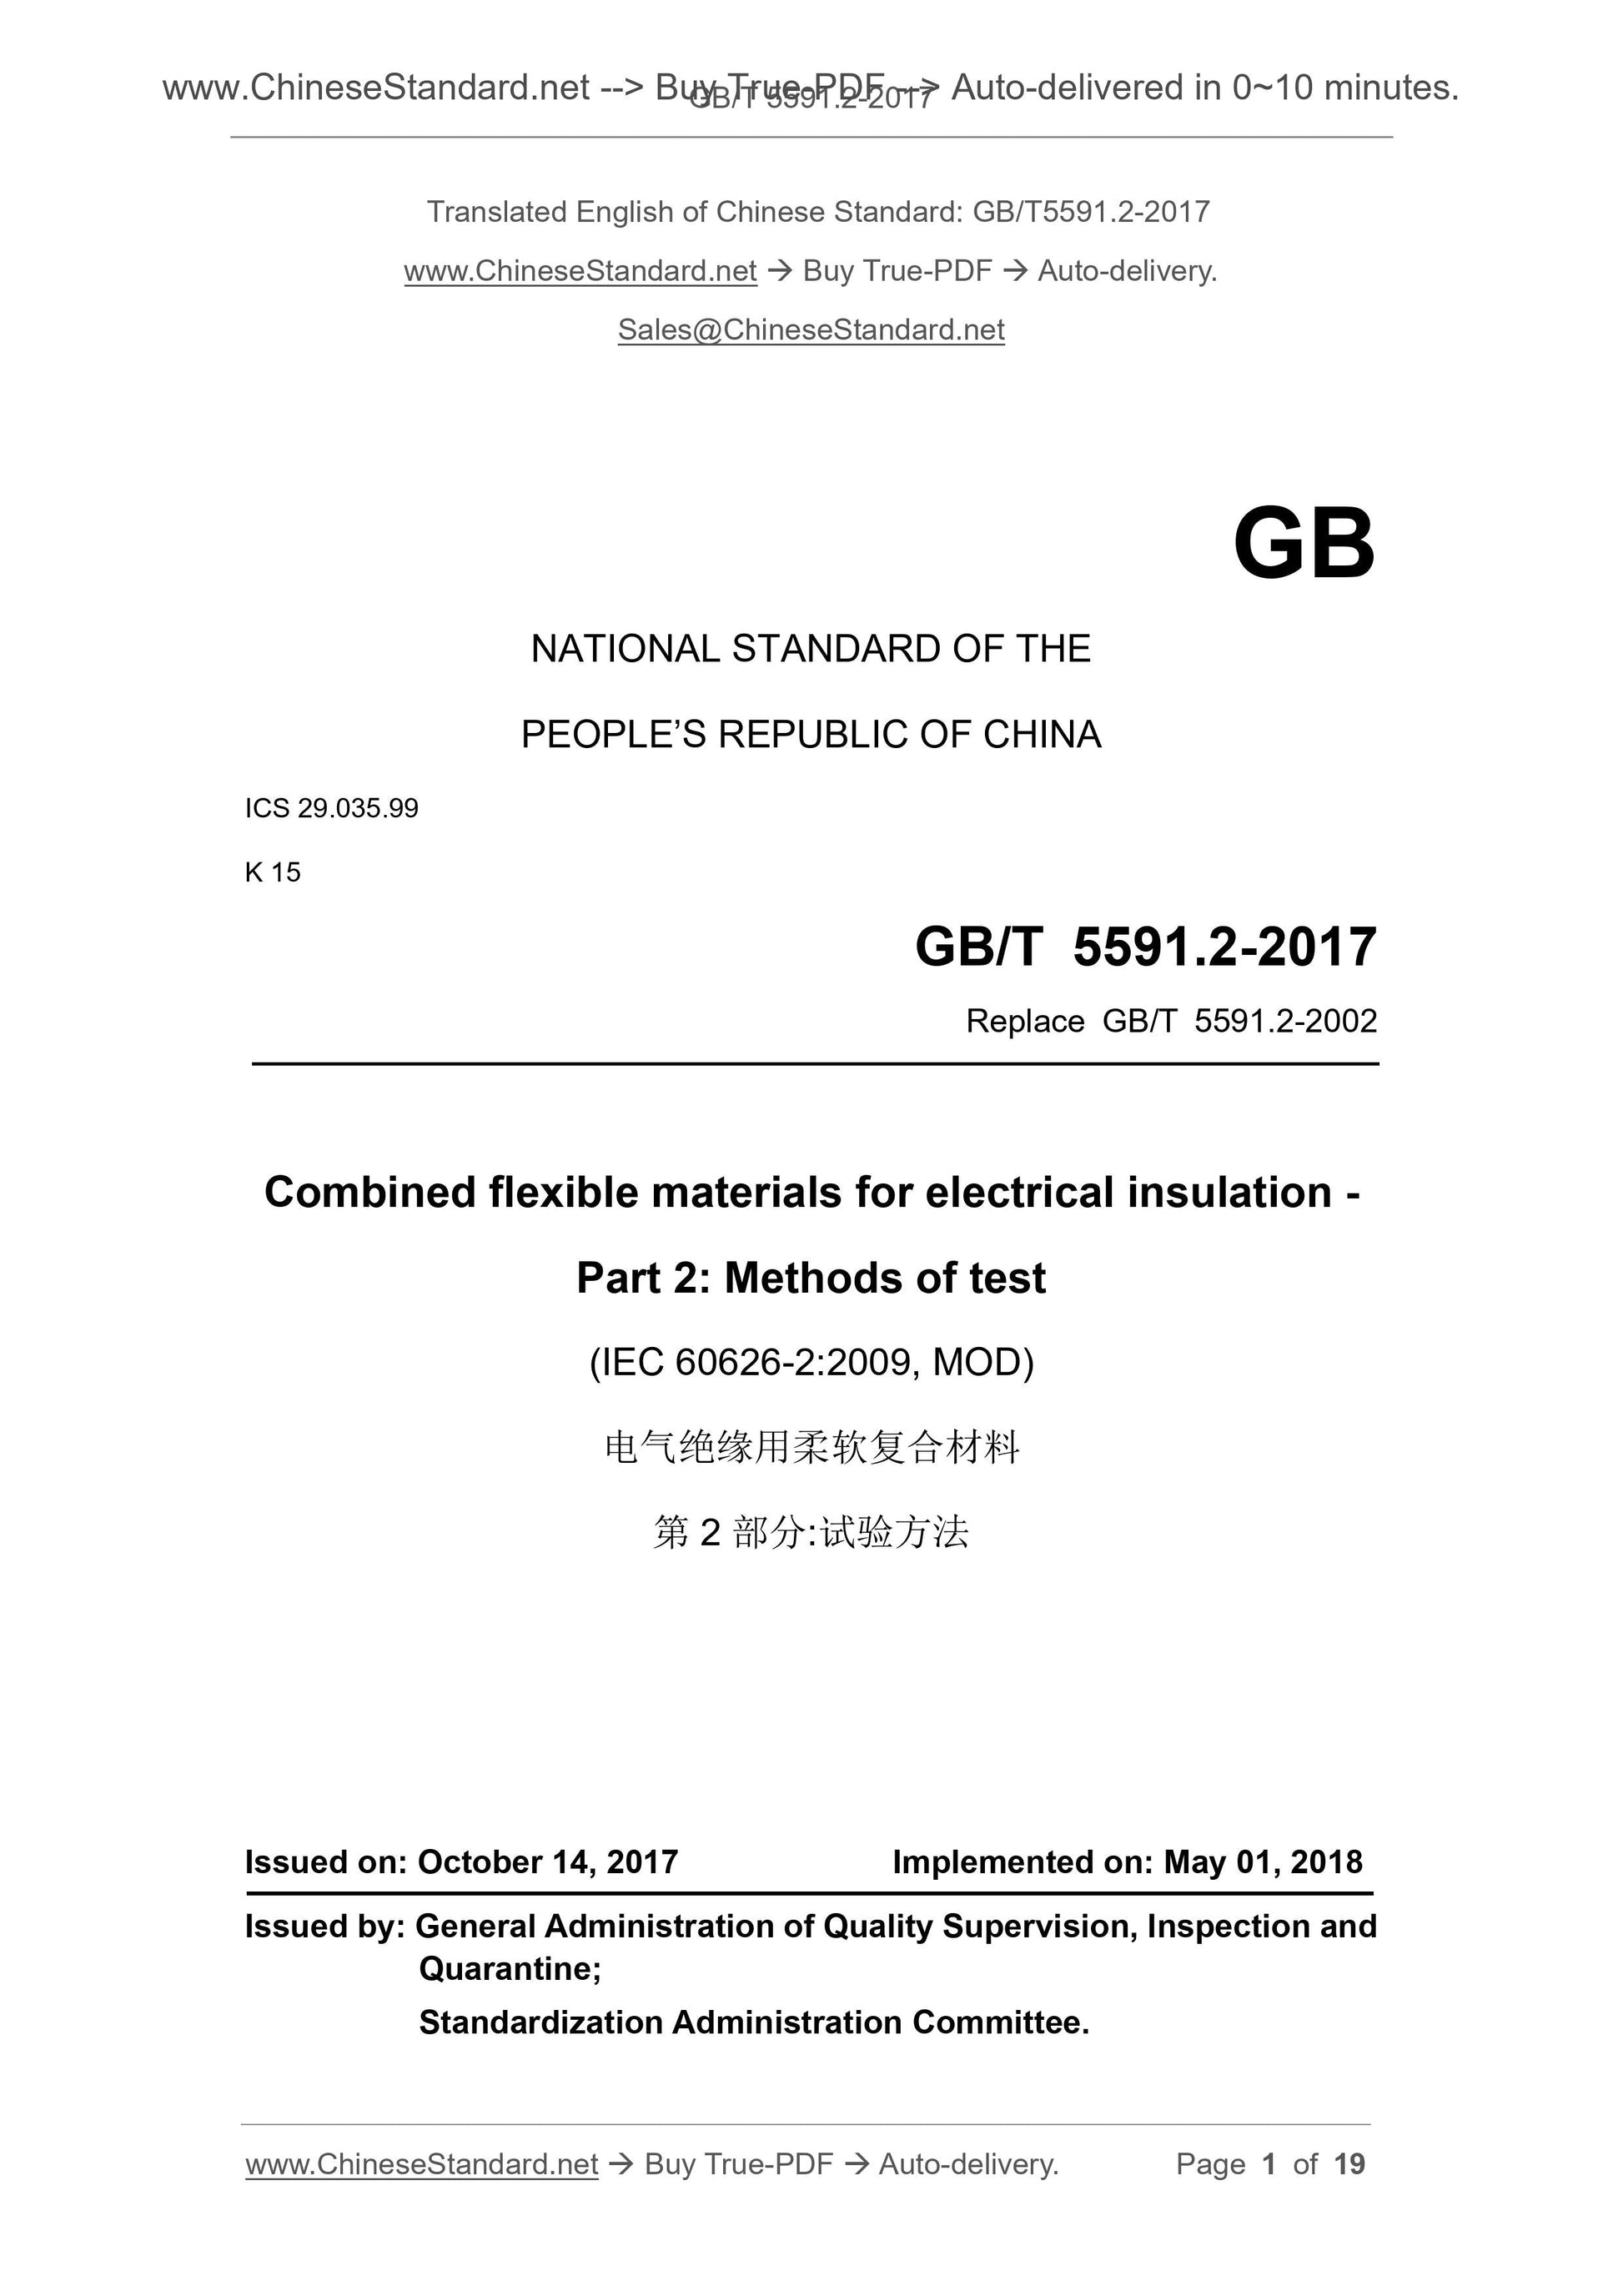 GB/T 5591.2-2017 Page 1